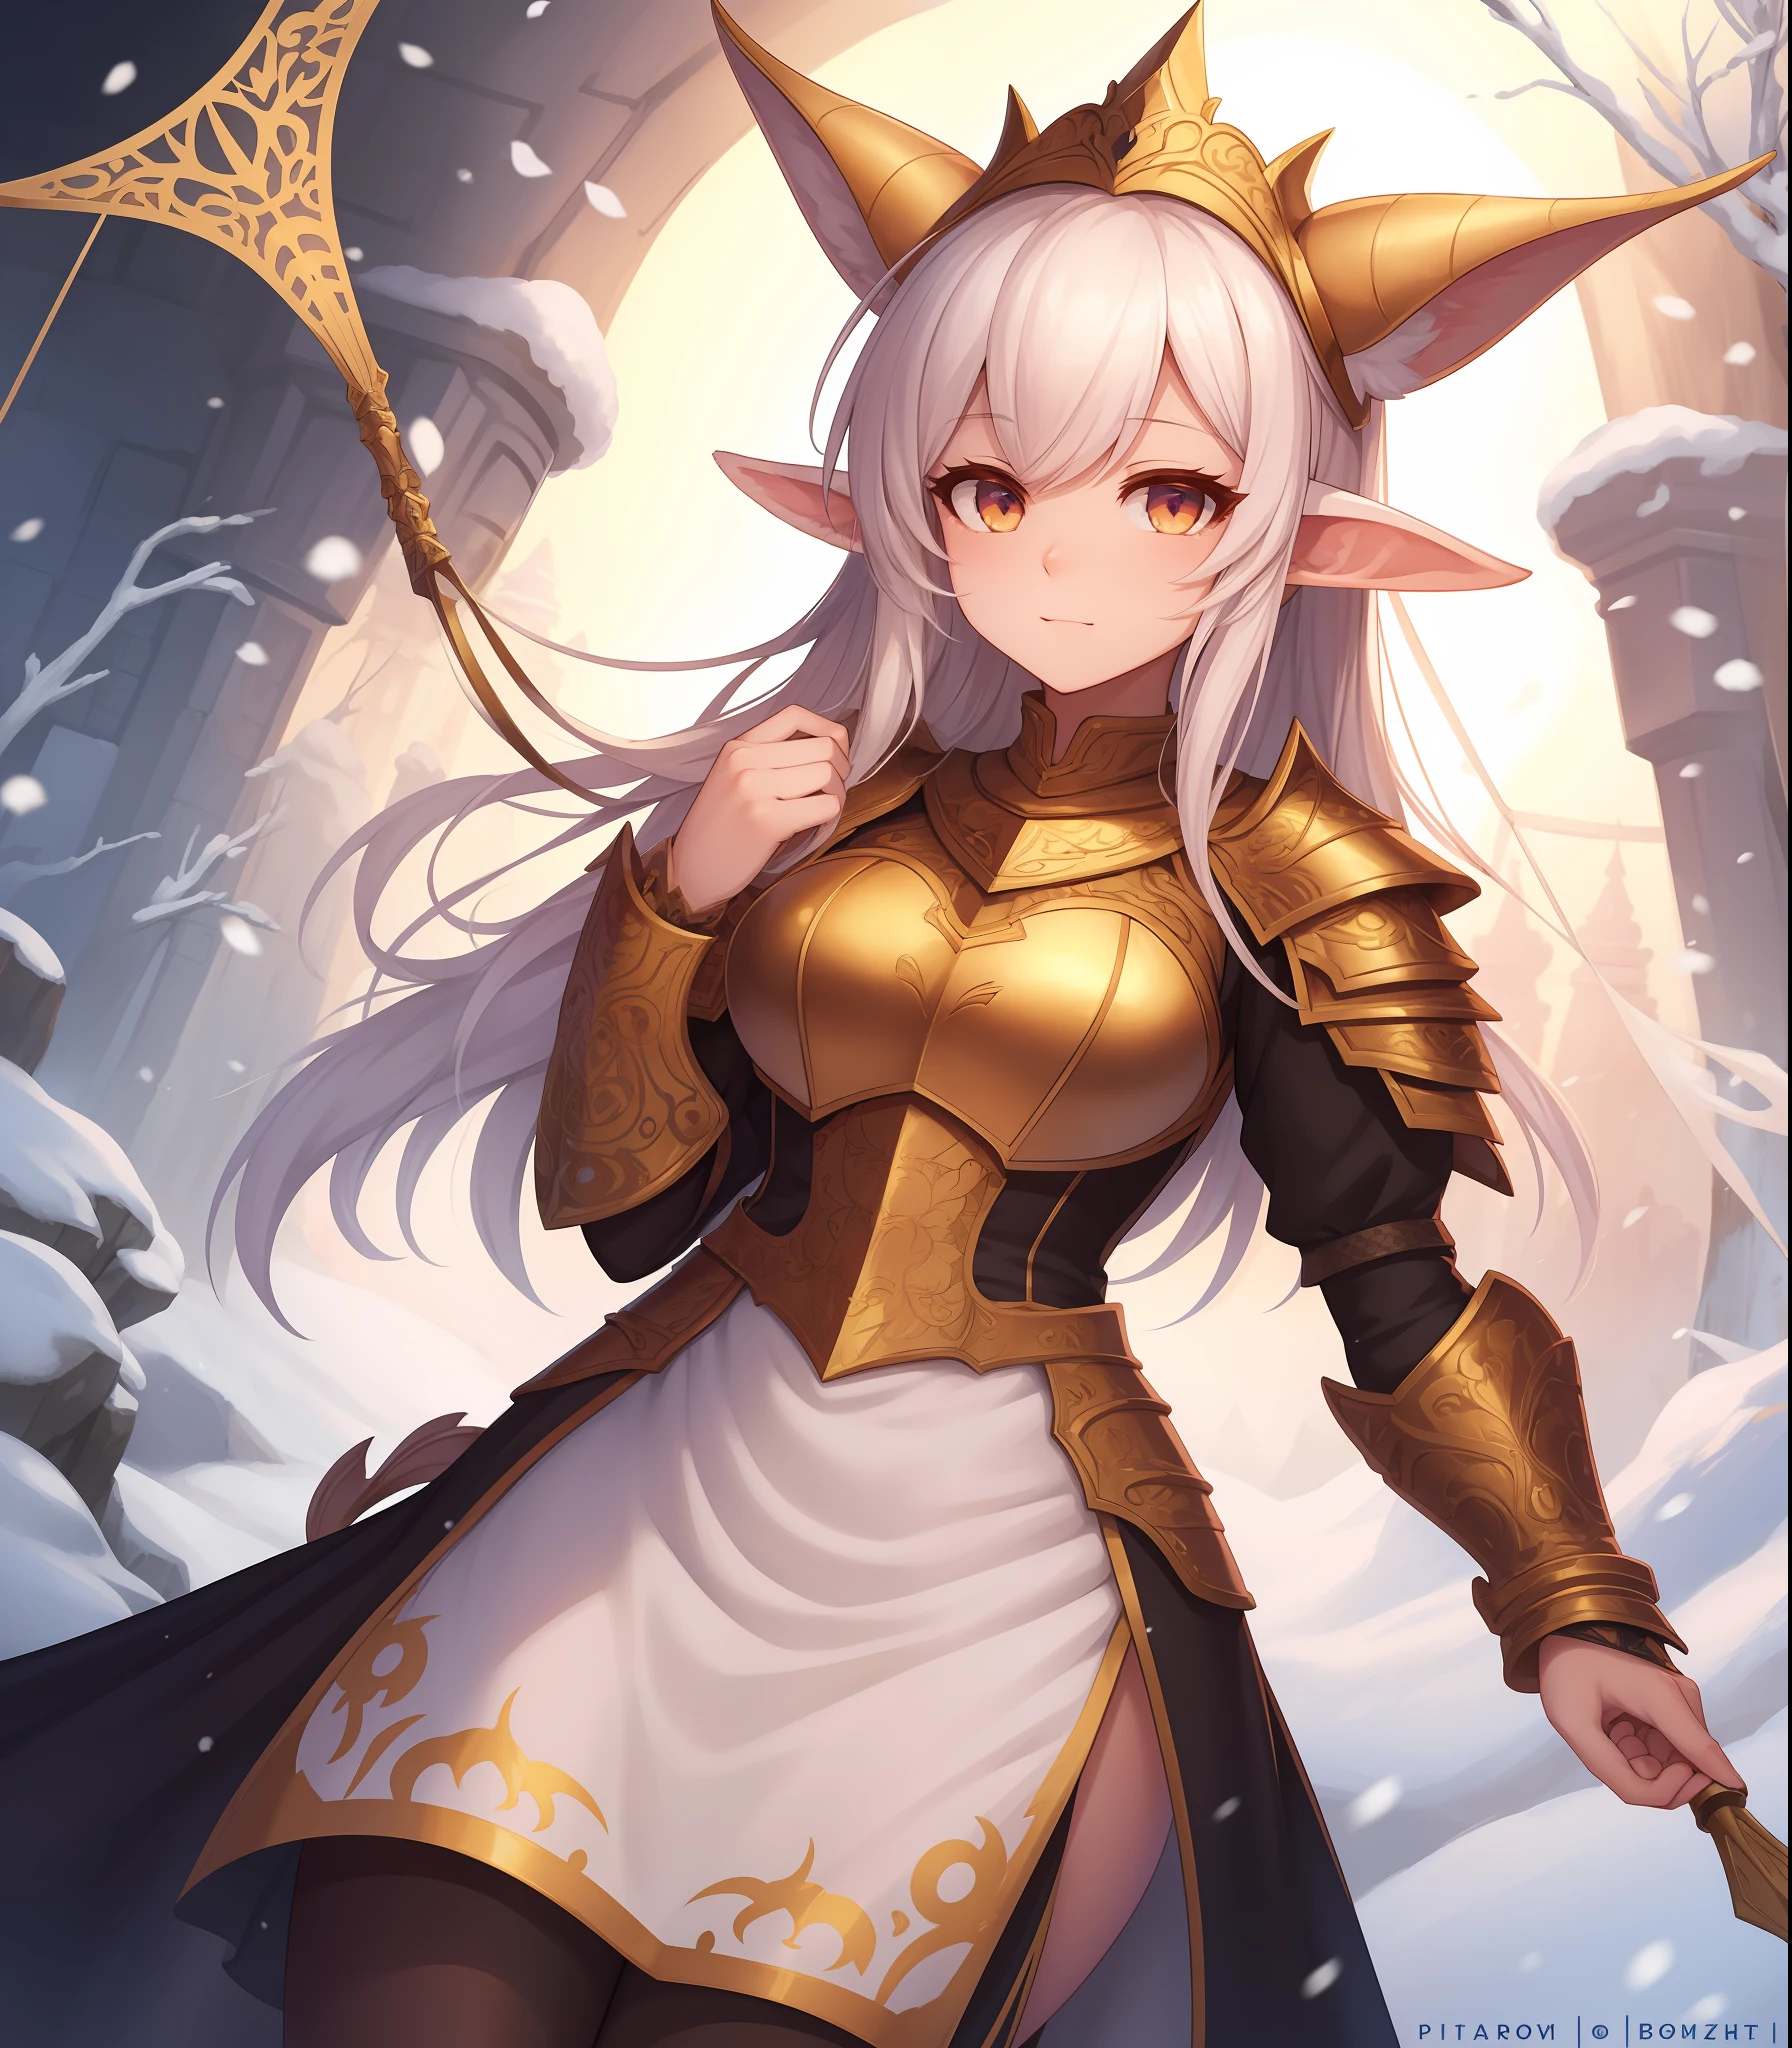 Barometz monster girl, sheep horns and ears, white fluffy hair with golden headpiece resembling an intricate plate of armor, pink and white Snow Kite Elf dress, peaches all around, best quality, masterpiece